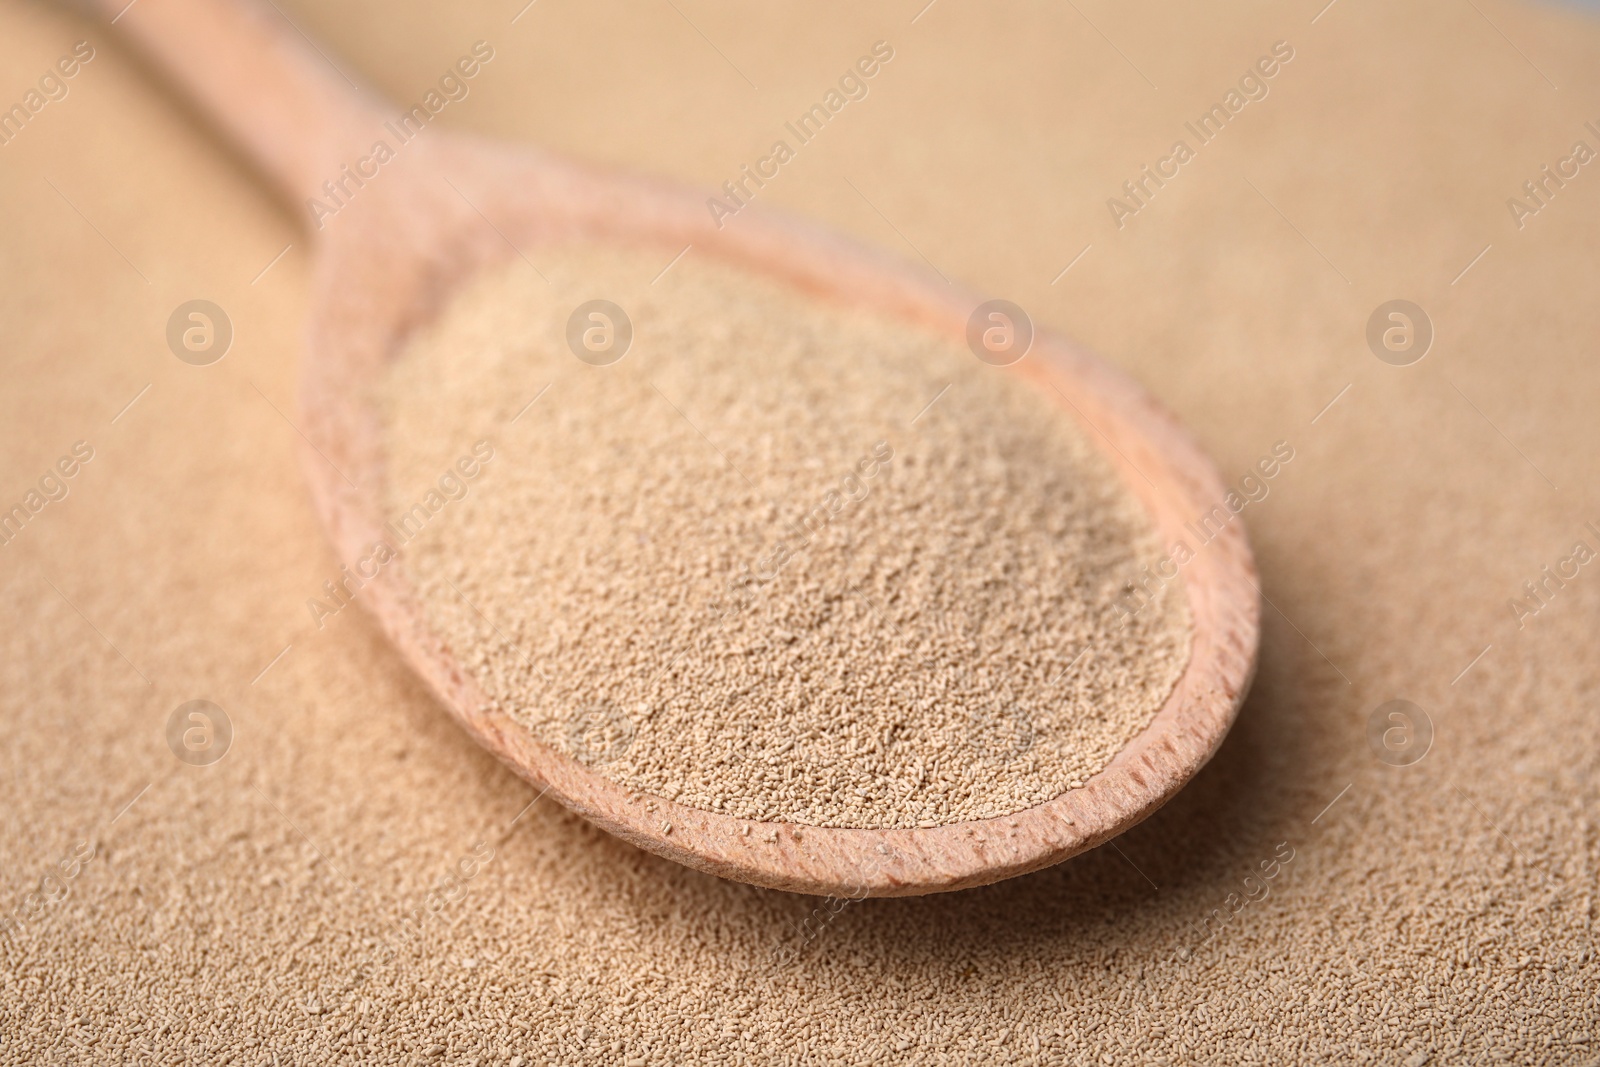 Photo of Spoon with granulated yeast, closeup view. Ingredient for baking